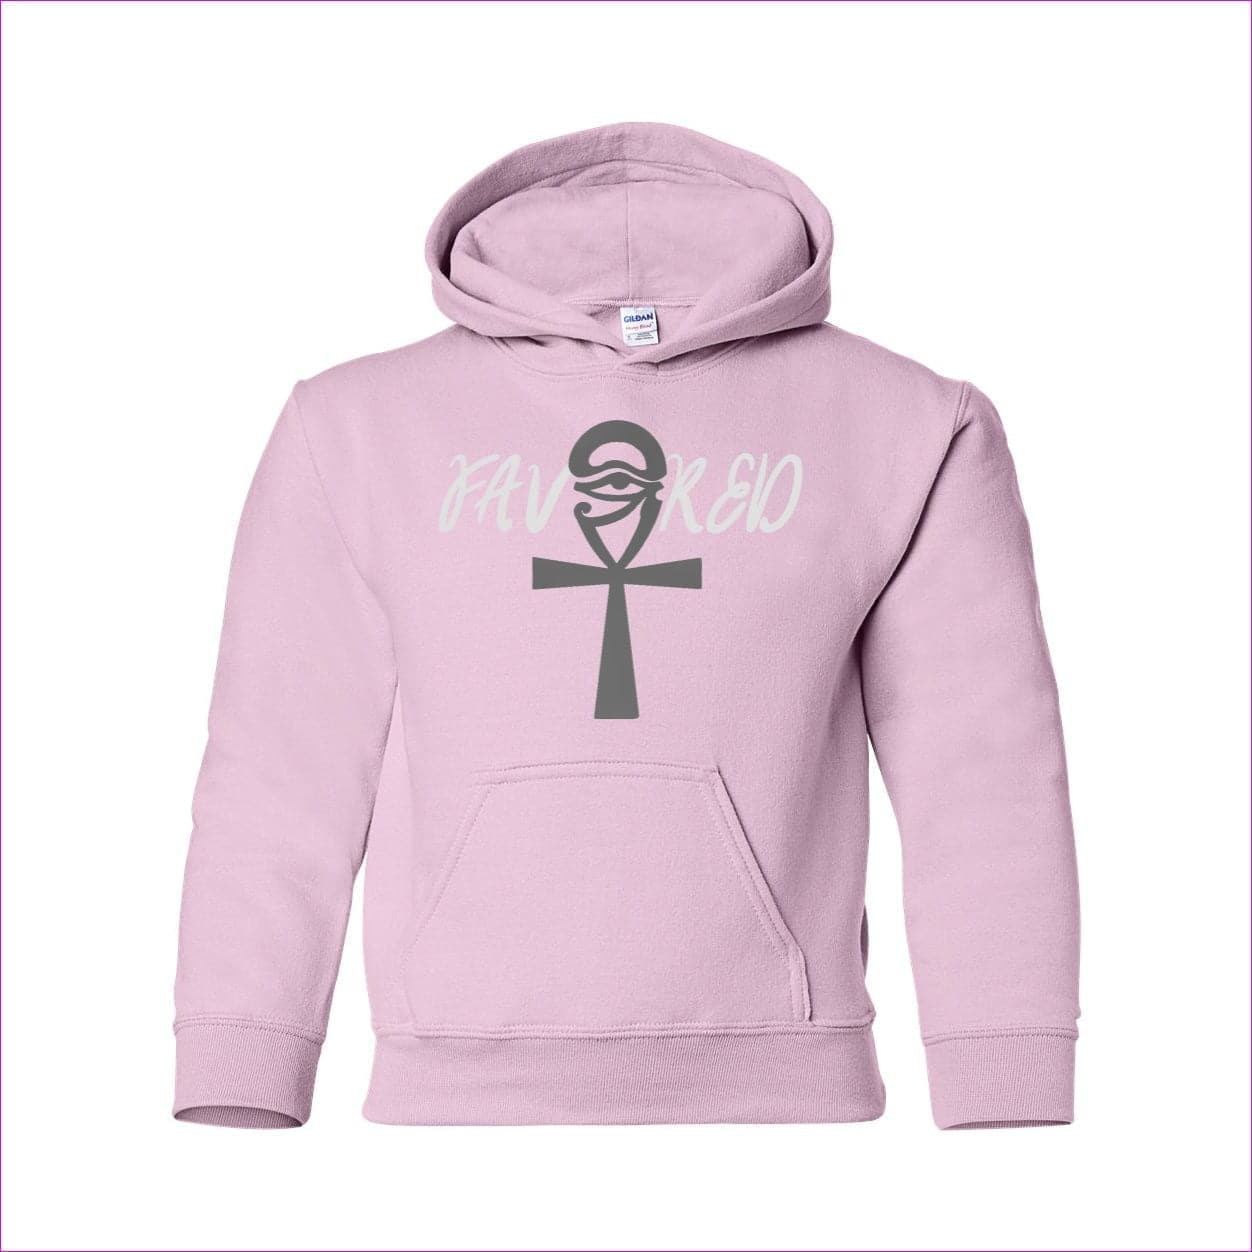 Light Pink Favored Heavy Blend Youth Hooded Sweatshirt - kids hoodie at TFC&H Co.